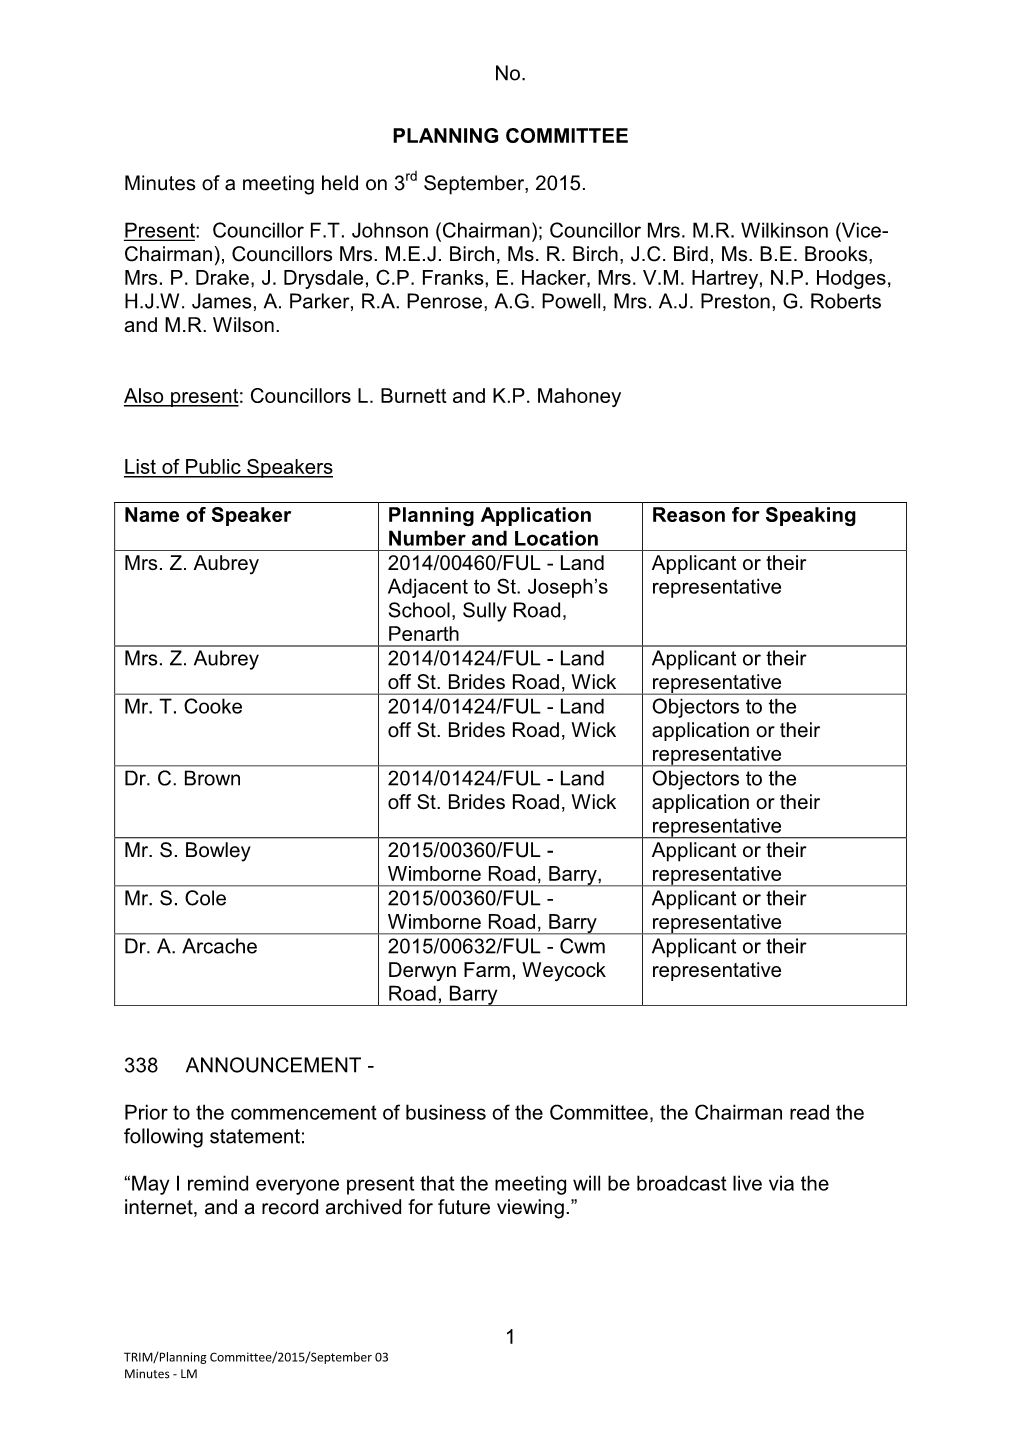 No. 1 PLANNING COMMITTEE Minutes of a Meeting Held on 3 September, 2015. Present